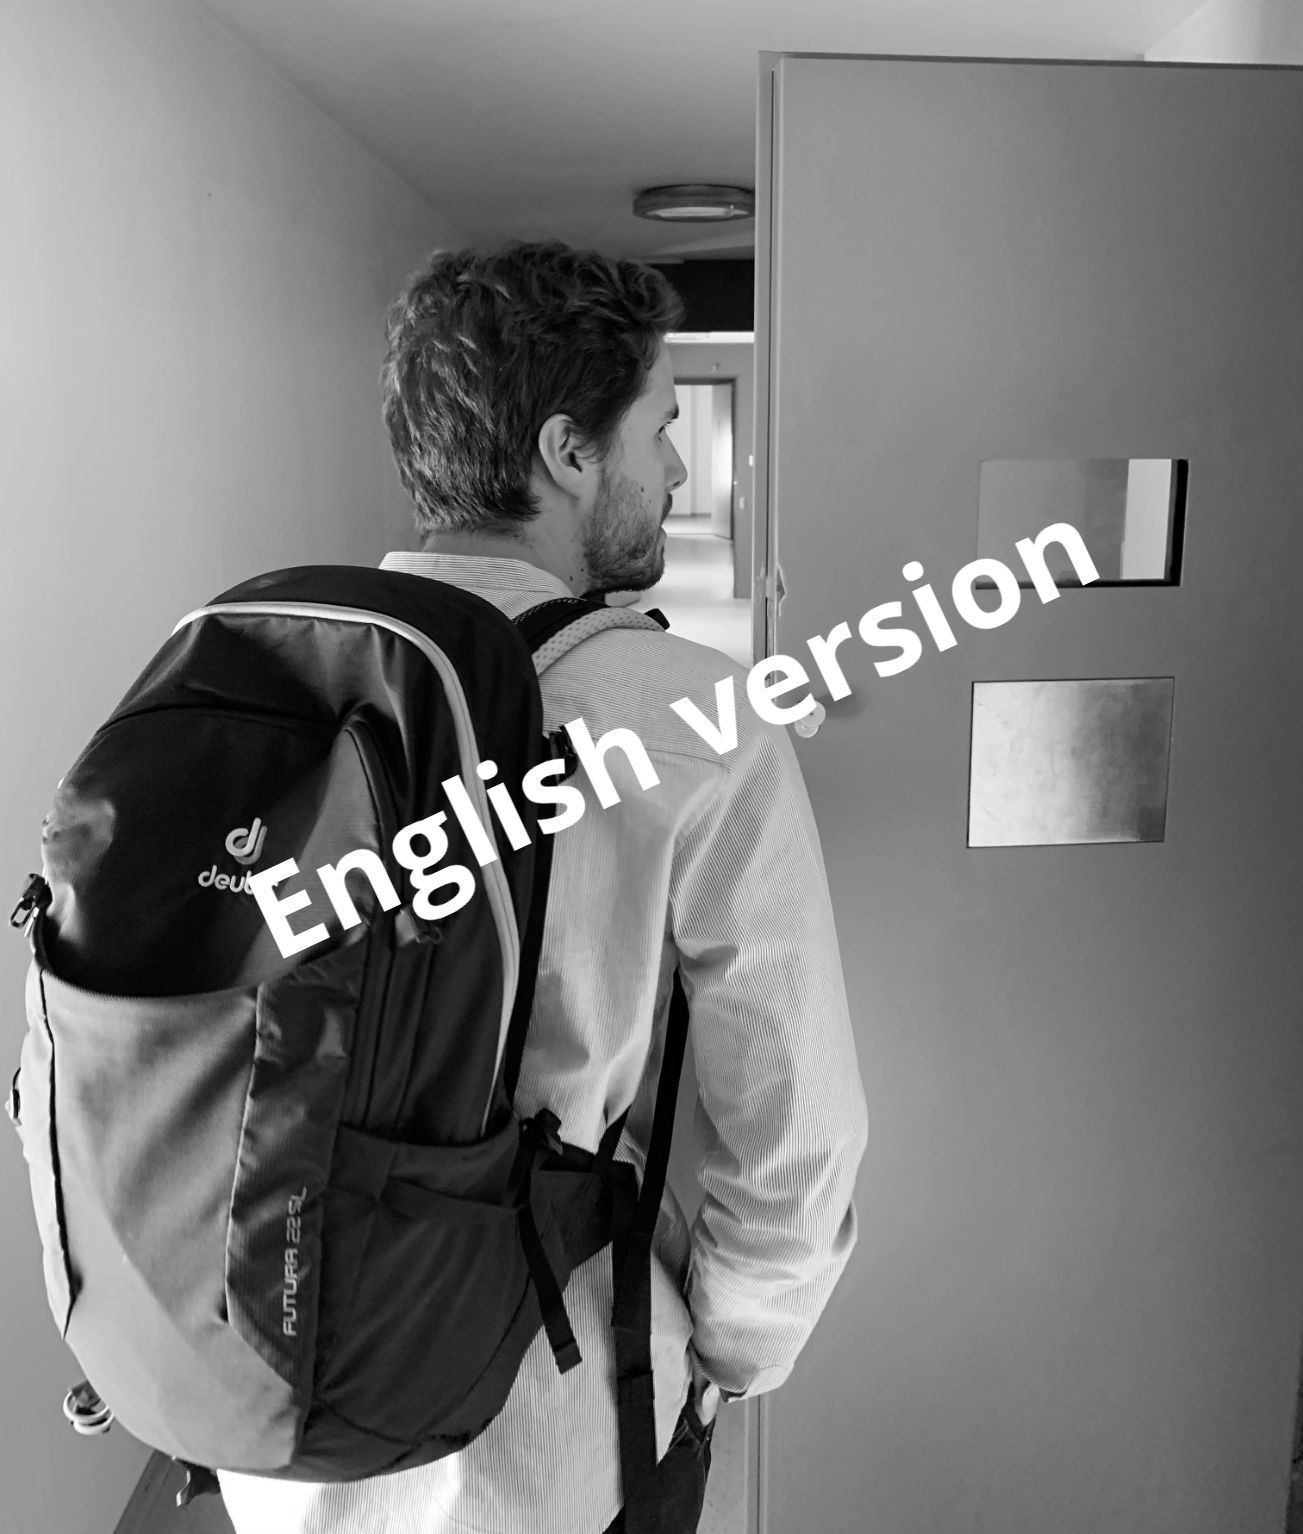 English Version: The backpack is packed and the adventure can begin!